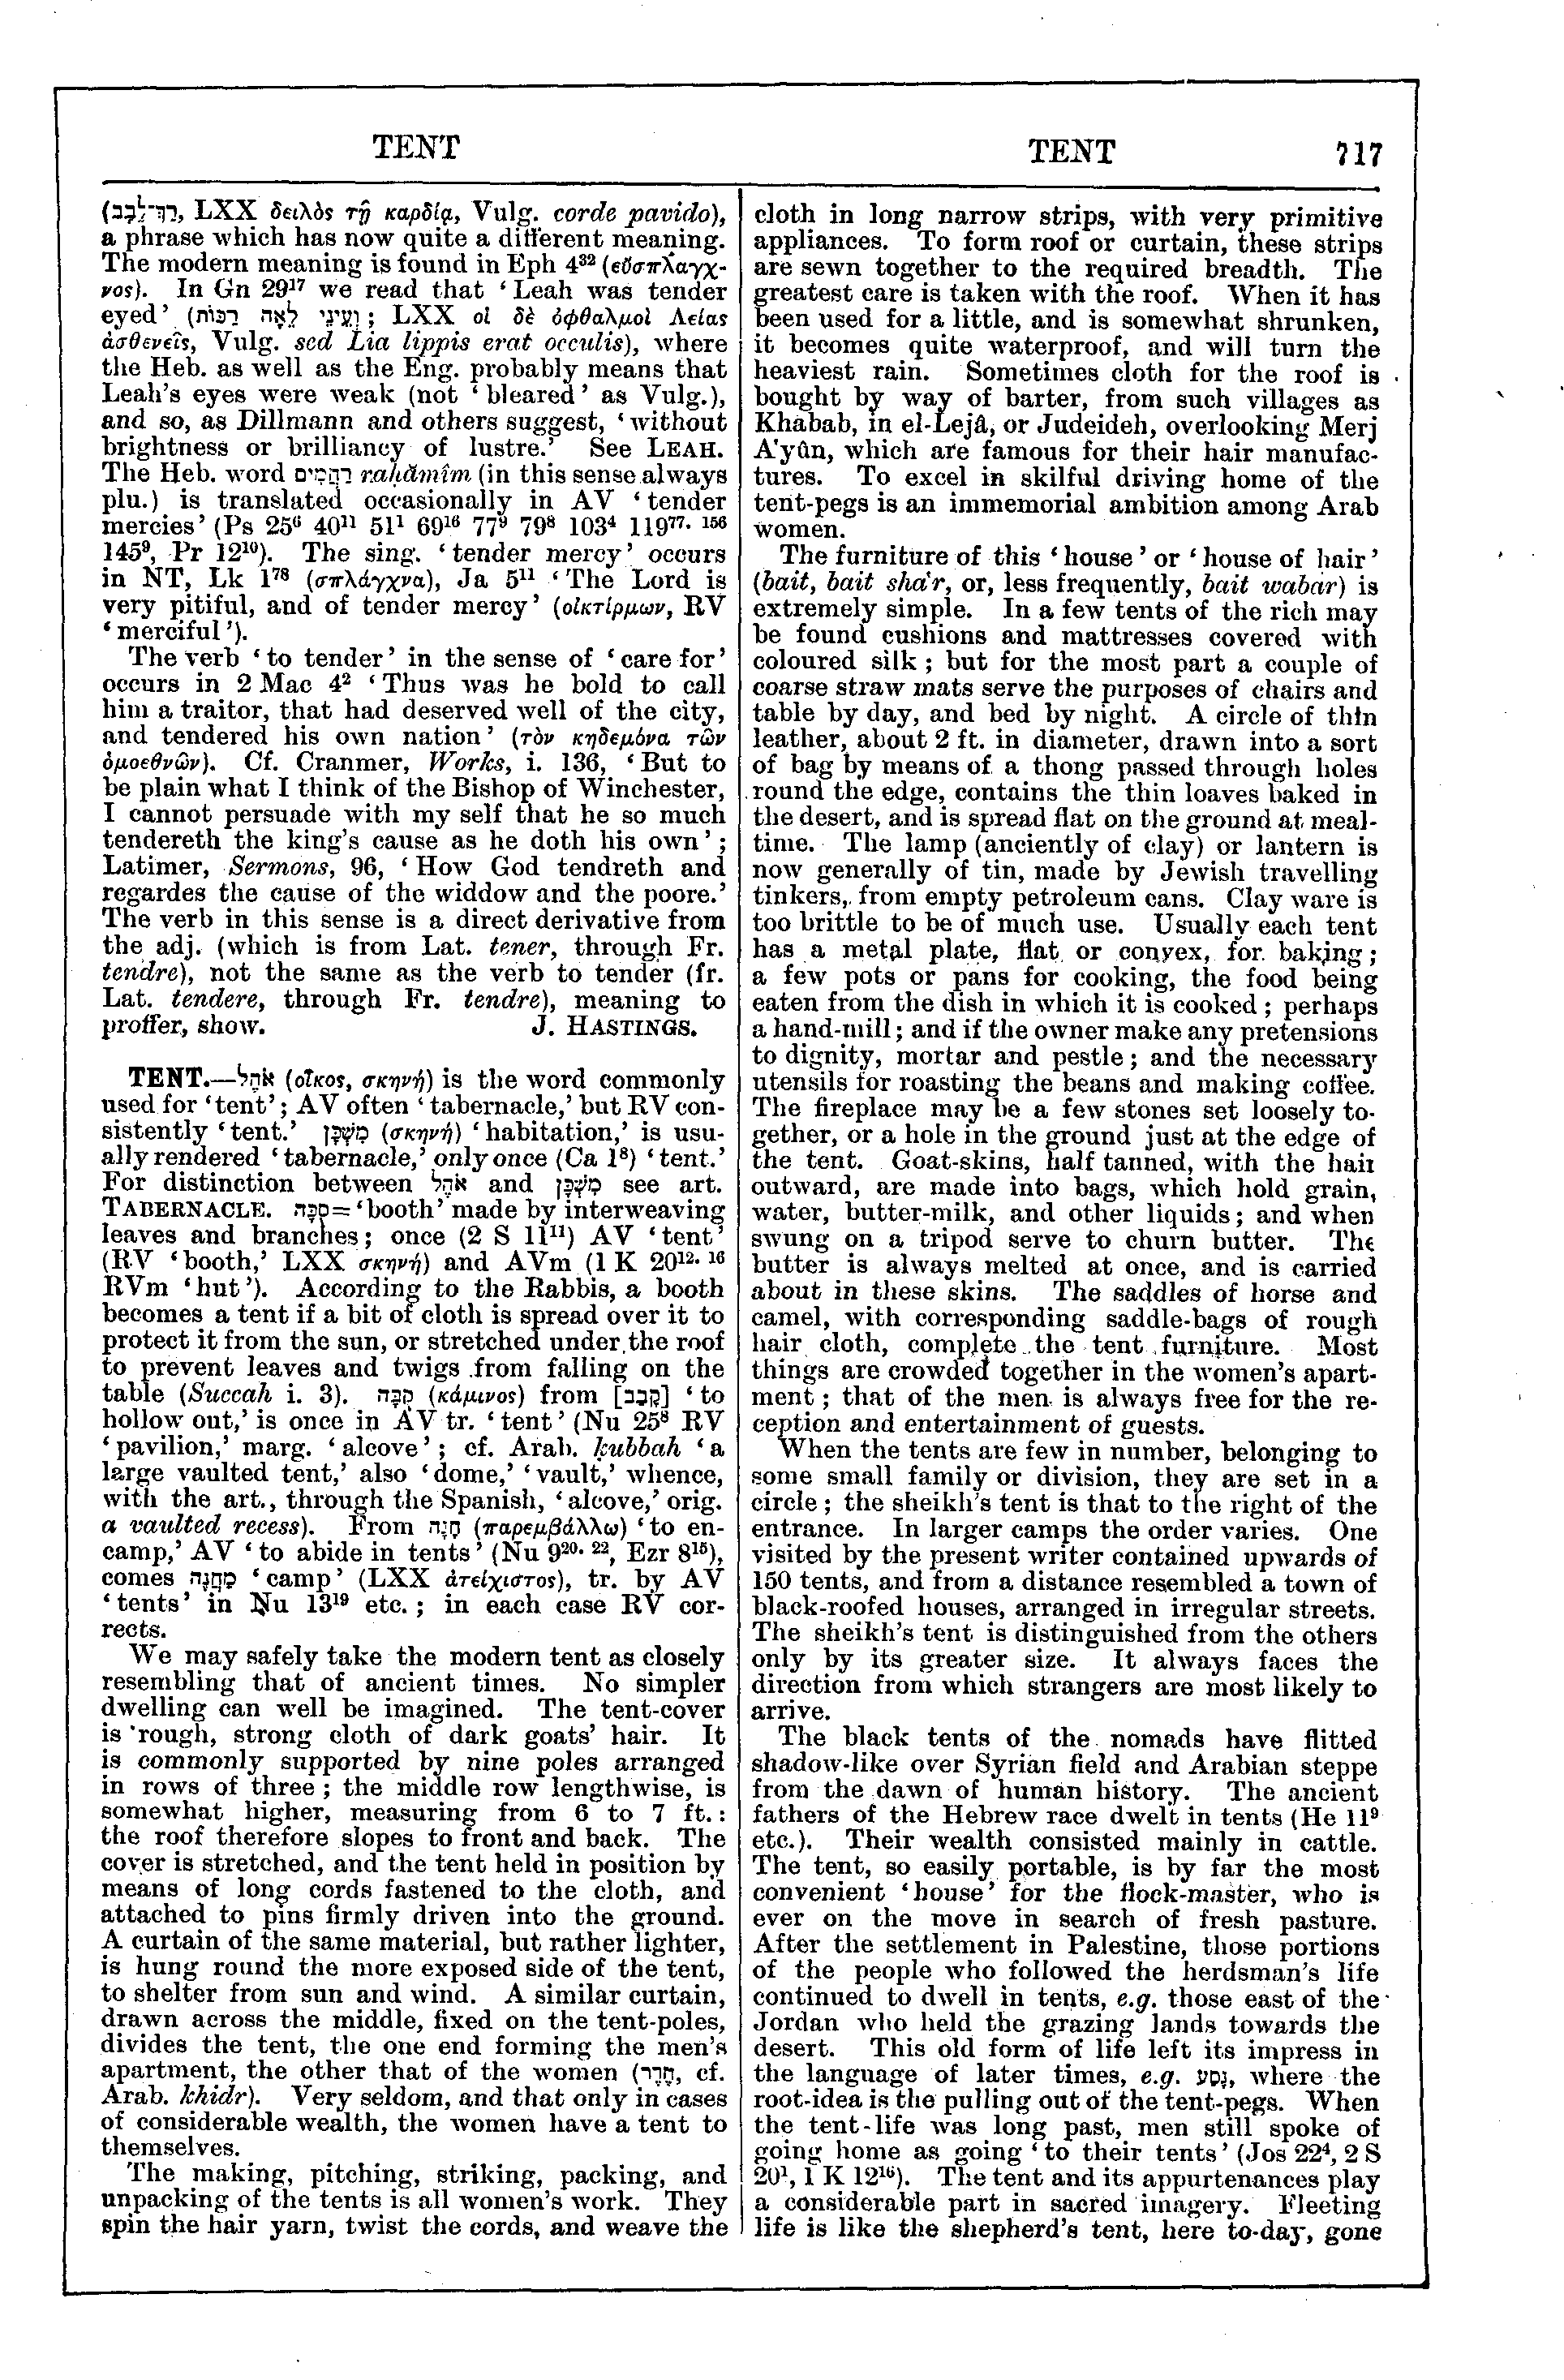 Image of page 717